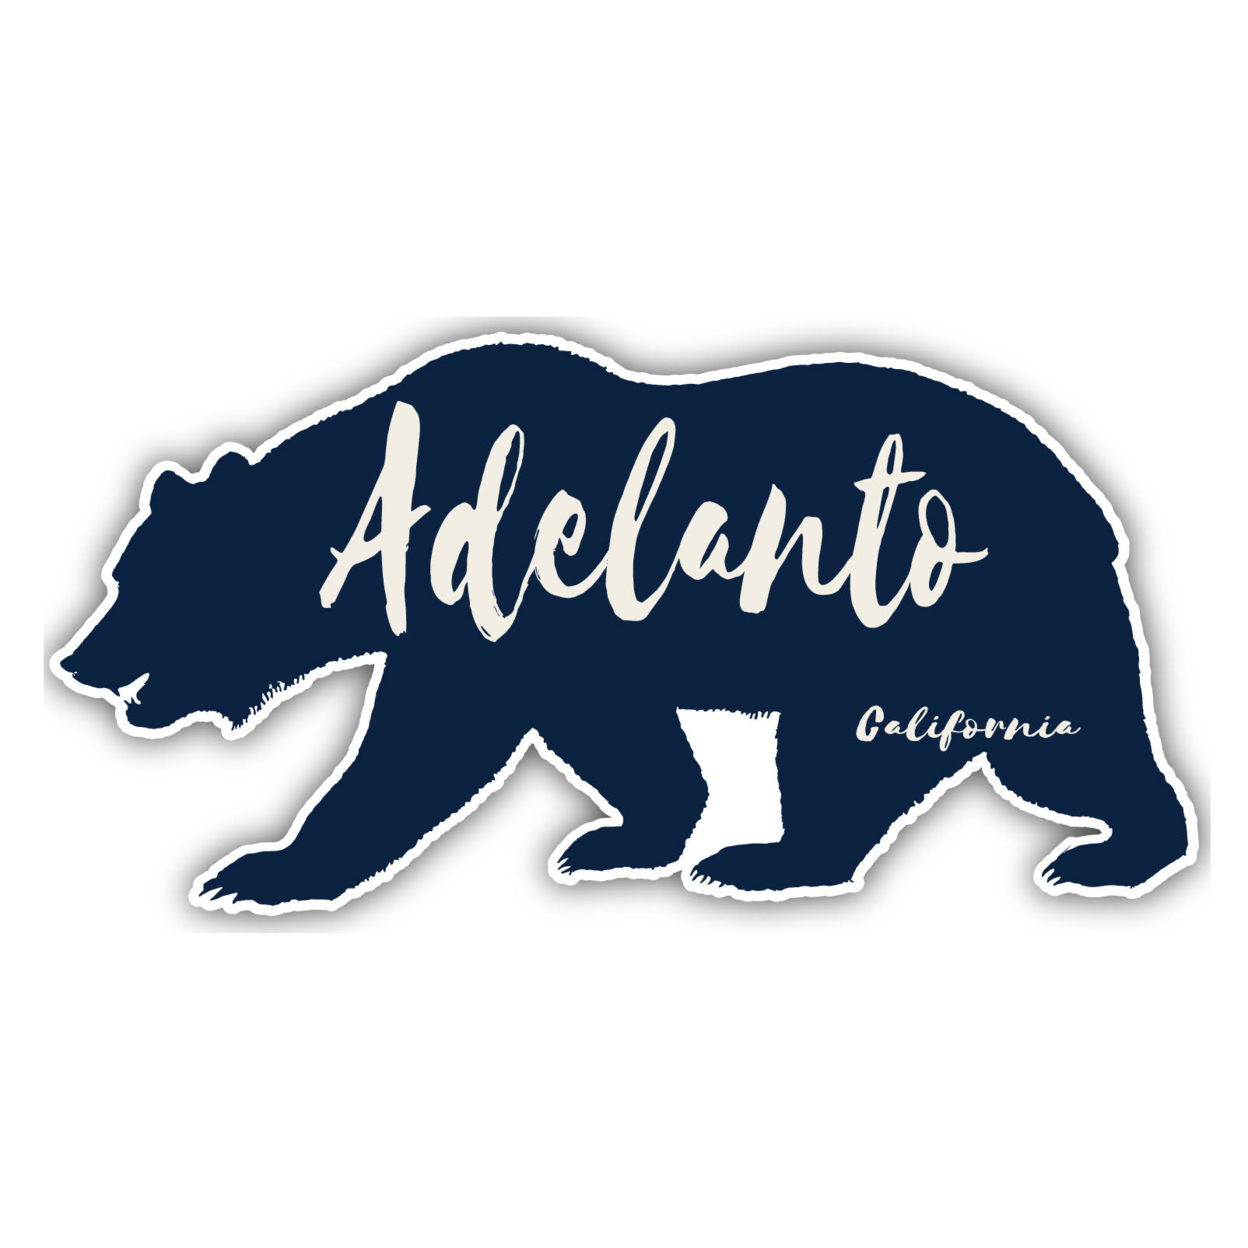 Adelanto California Souvenir Decorative Stickers (Choose Theme And Size) - 4-Pack, 2-Inch, Bear